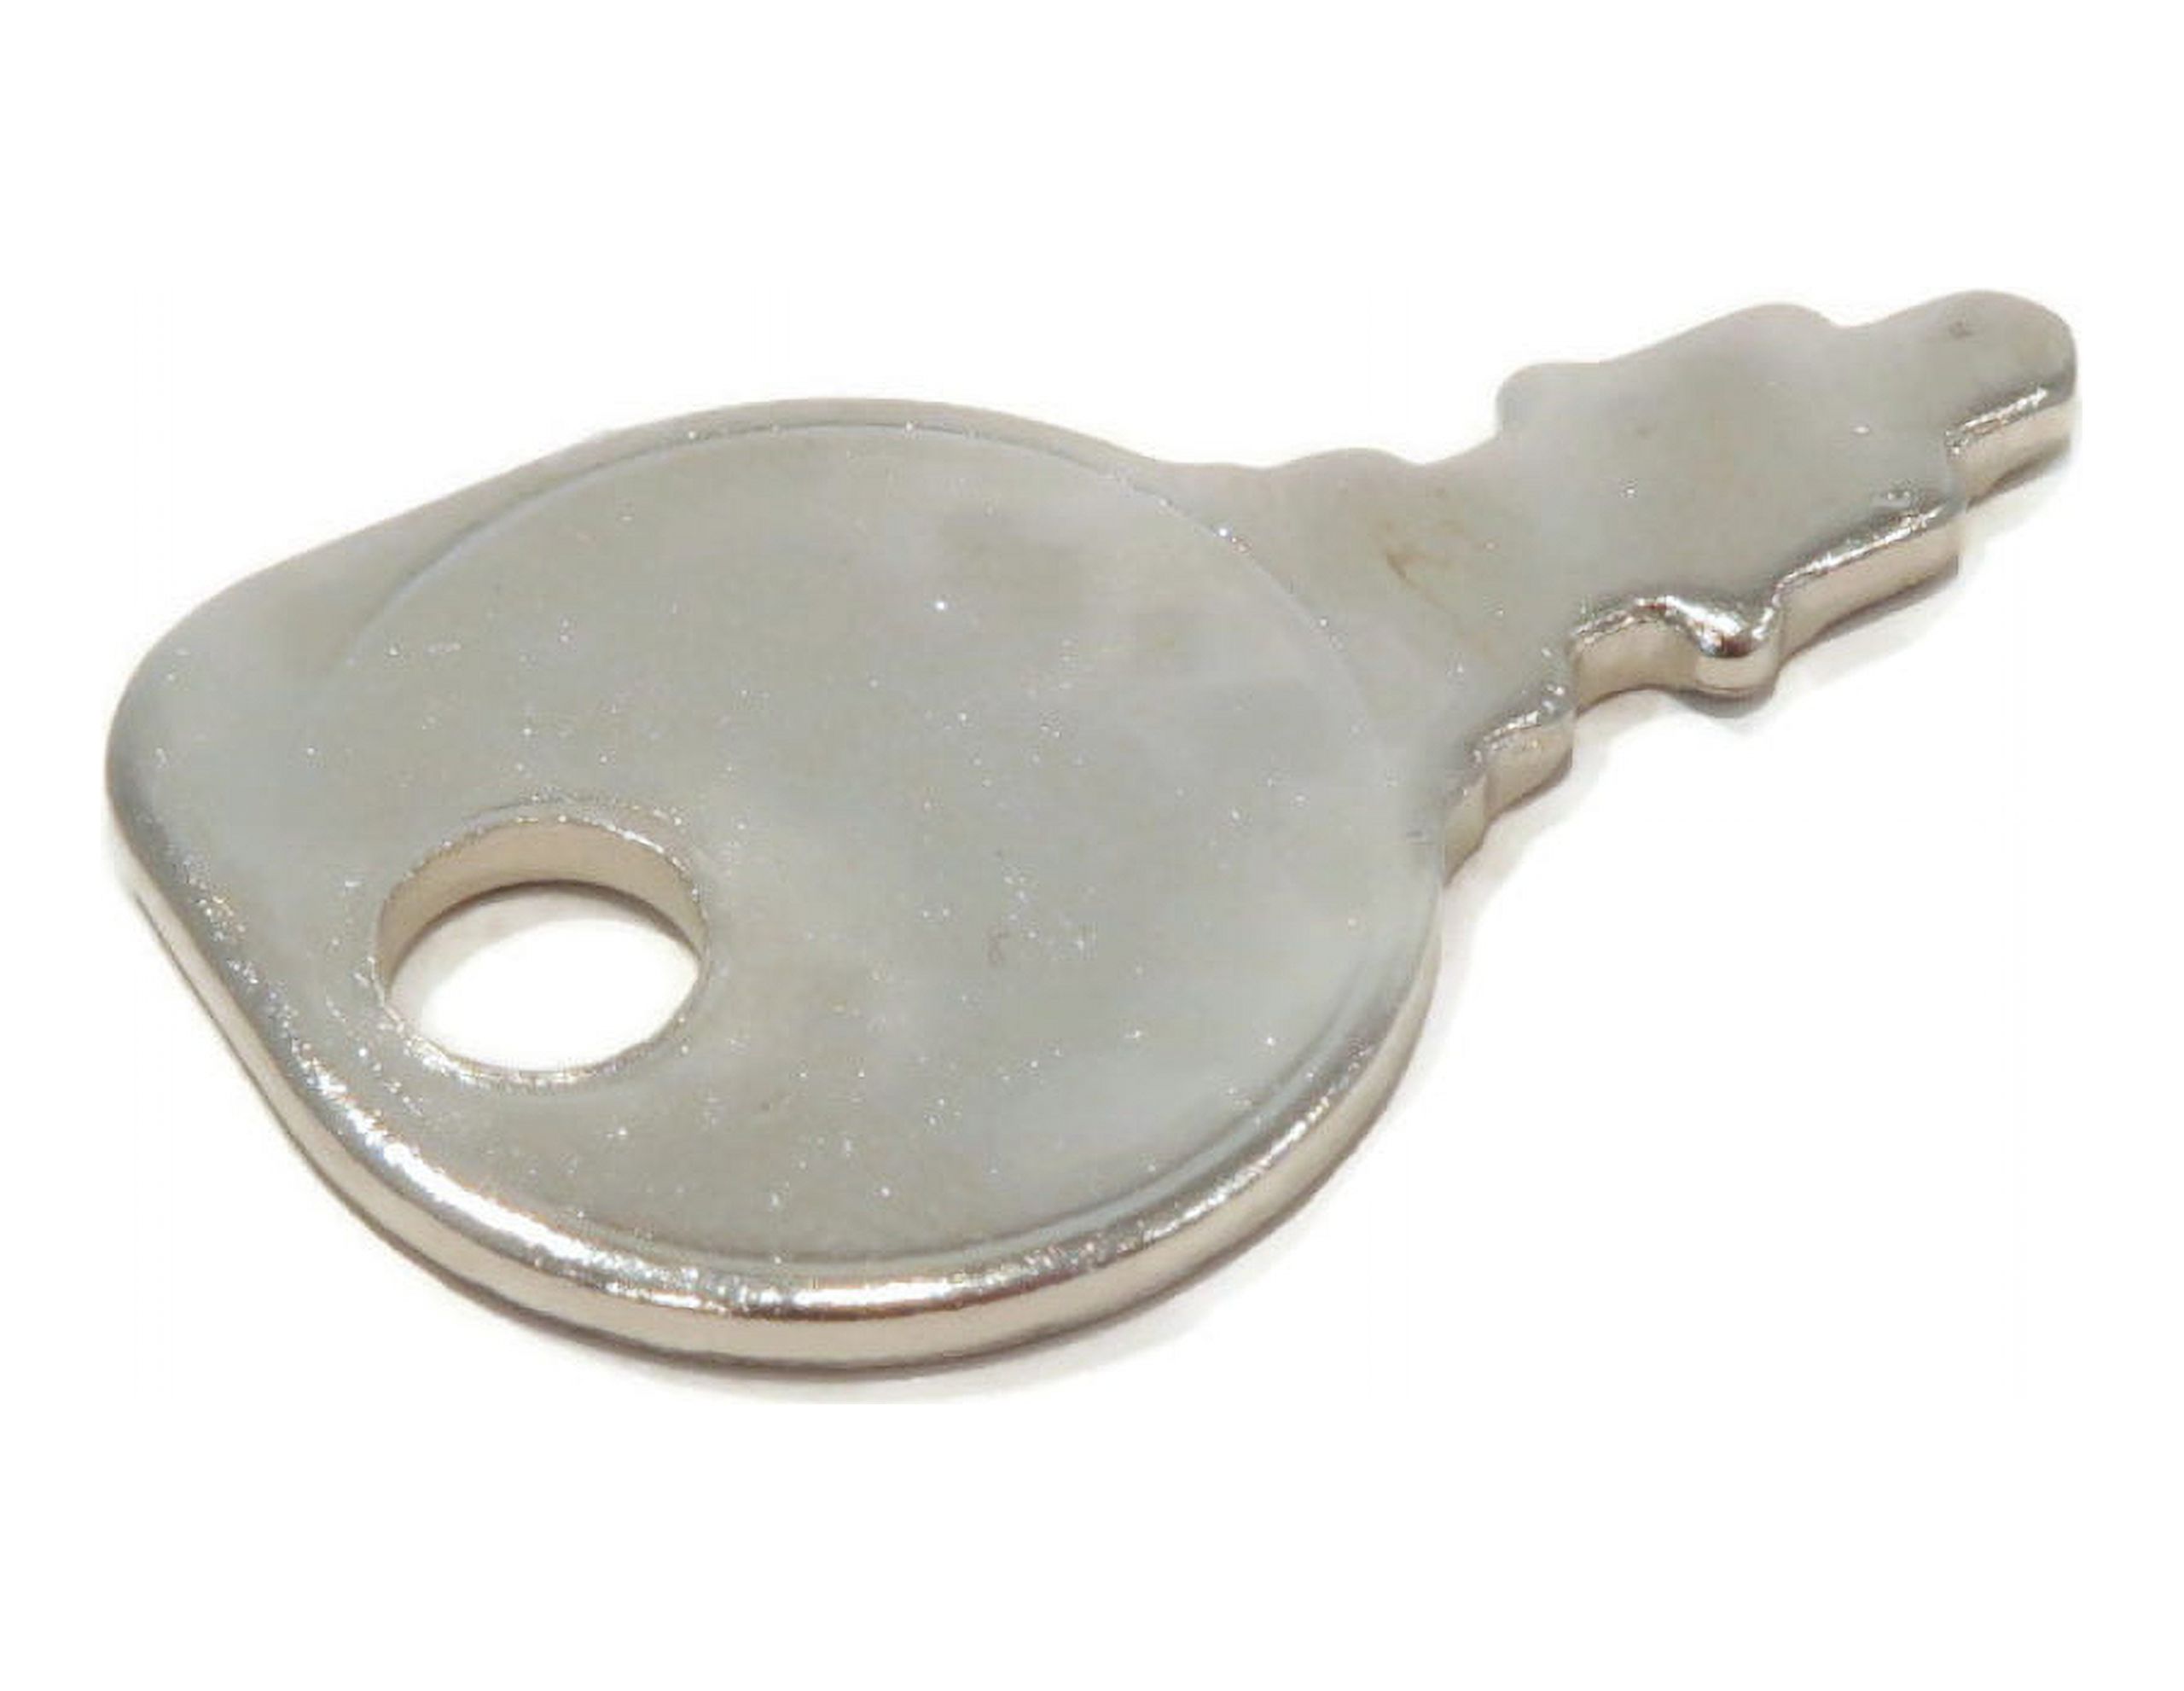 The ROP Shop | Starter Key For Briggs & Stratton 422707-1510-01, 422707-1511-01, 422707-1512-01 - image 3 of 5